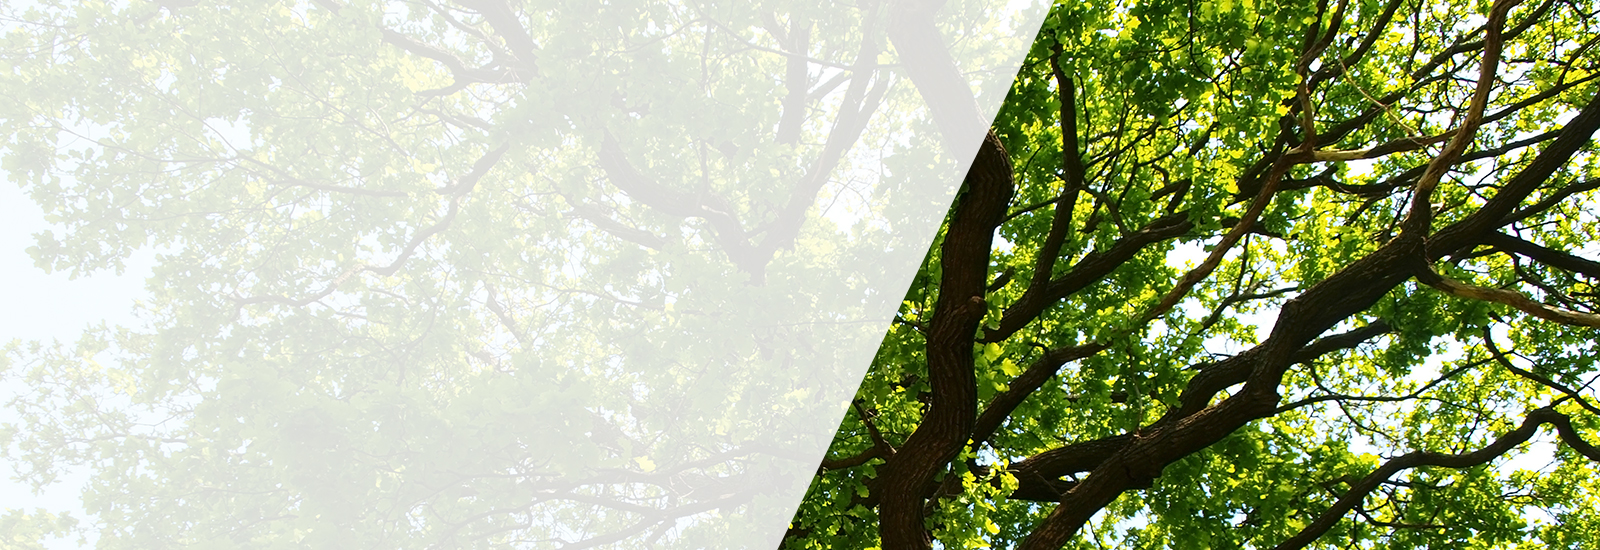 Tree canopy banner image